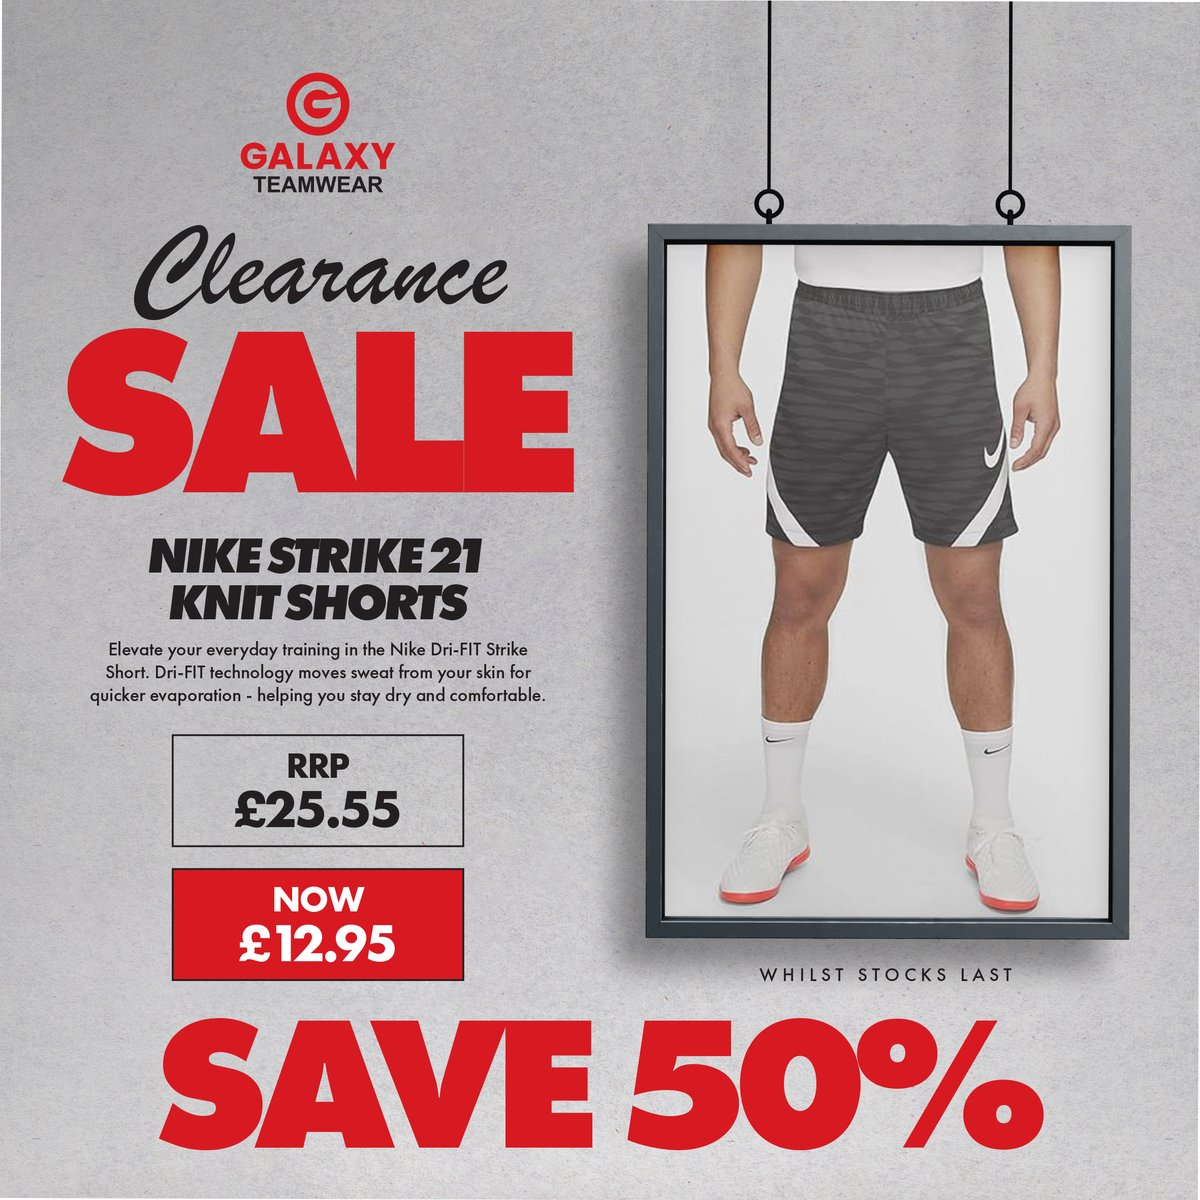 CLEARANCE SALE! Score big with up to 50% off on Nike Strike 21 Knit Shorts! Elevate your performance and style without breaking the bank. Don't miss out on this amazing deal – shop now! tinyurl.com/2ycm9wht #Nike #Sale #Sportswear